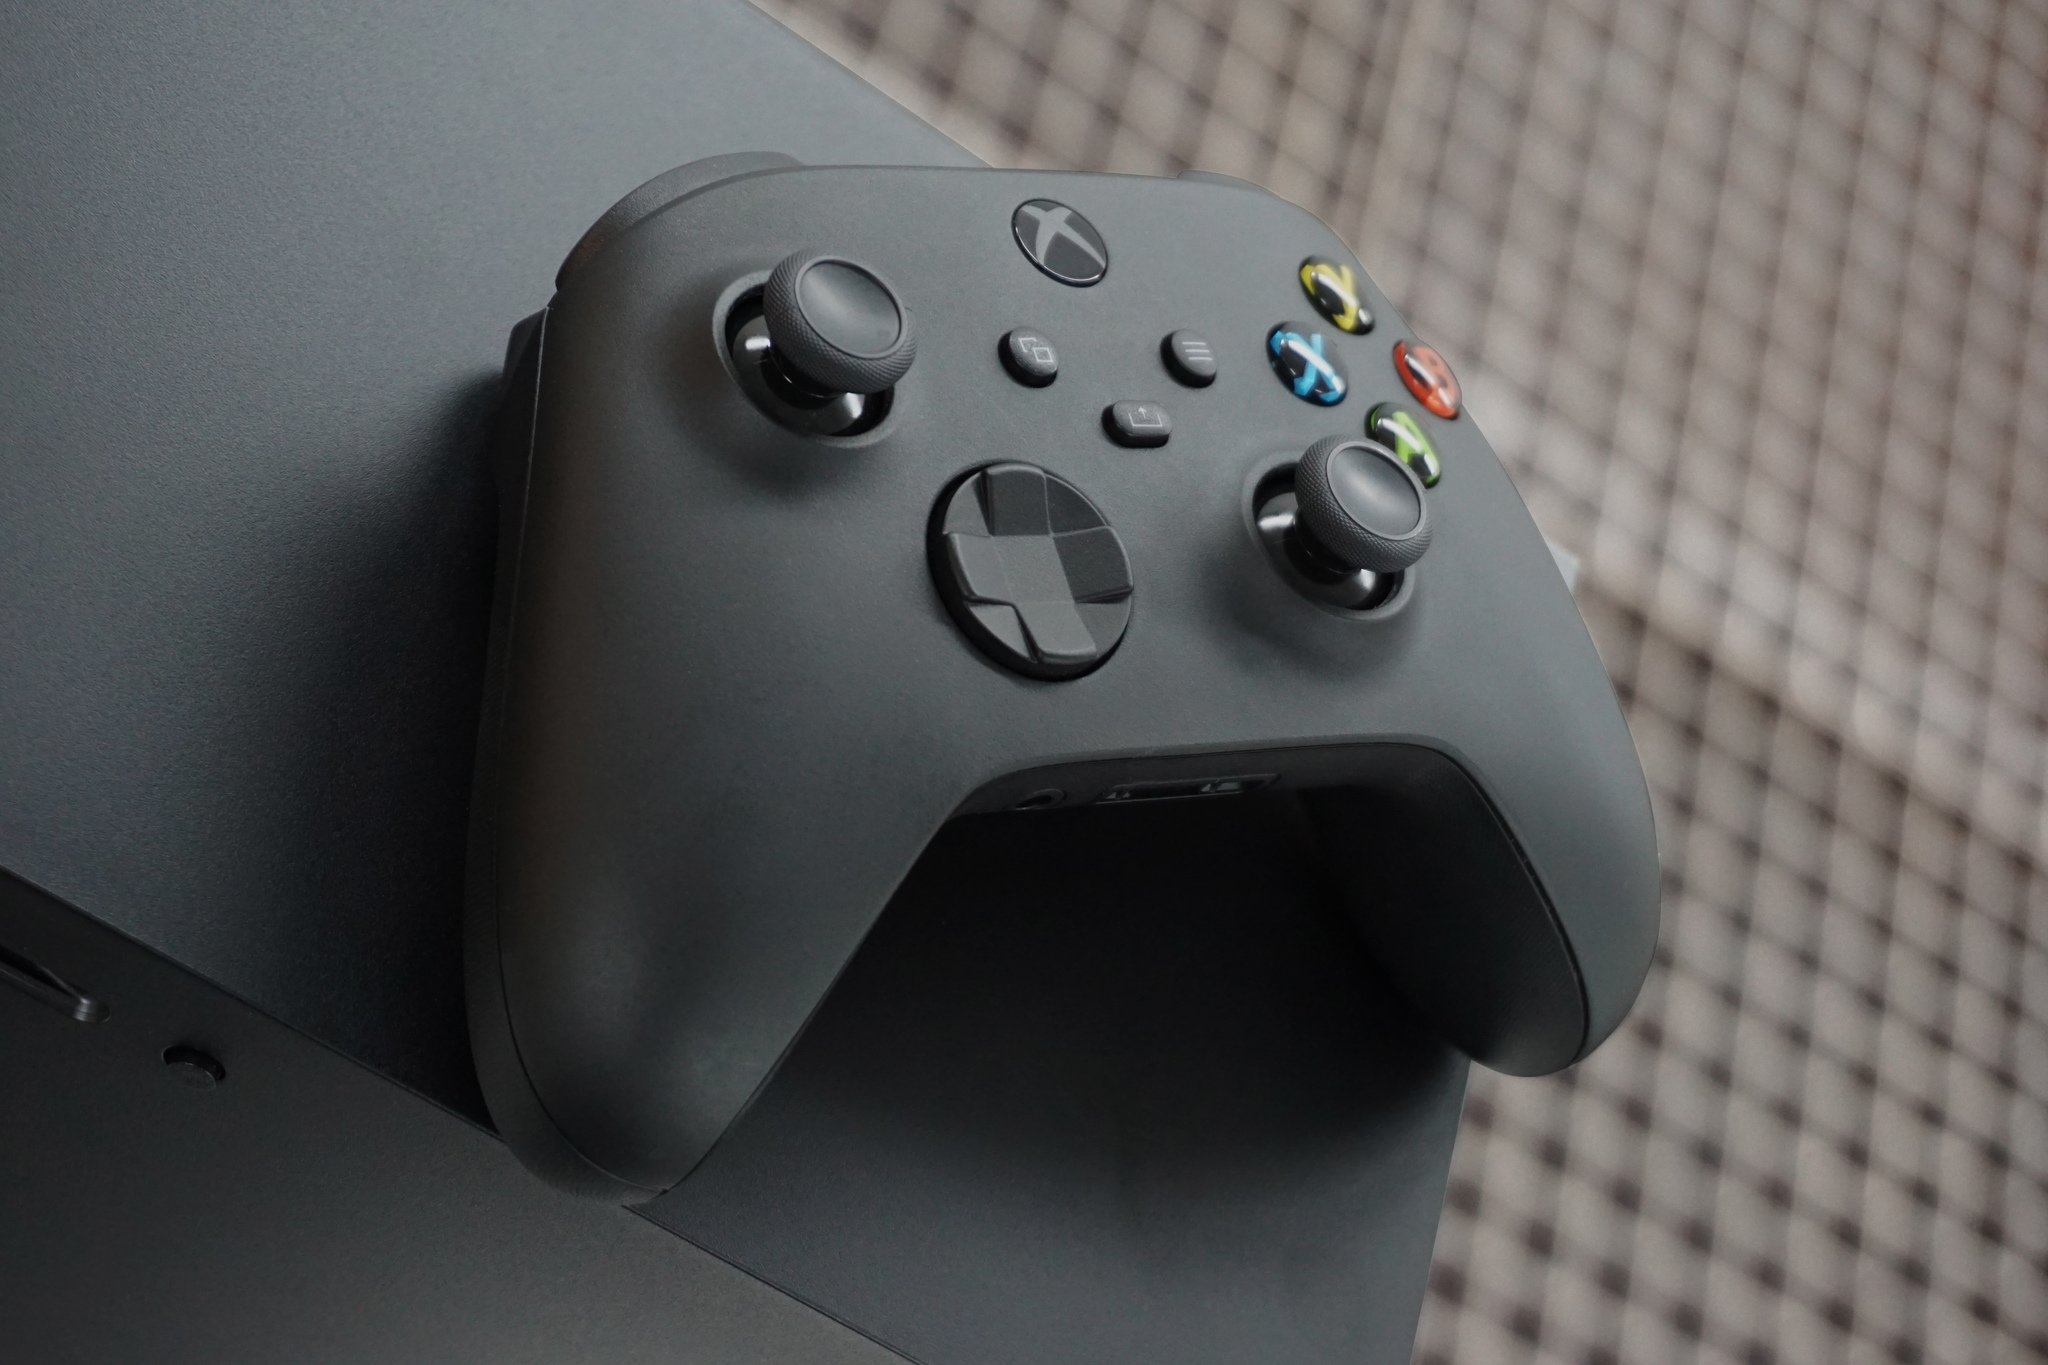 How to Pre-Order Xbox Series X, Series S in India: Price, Offers